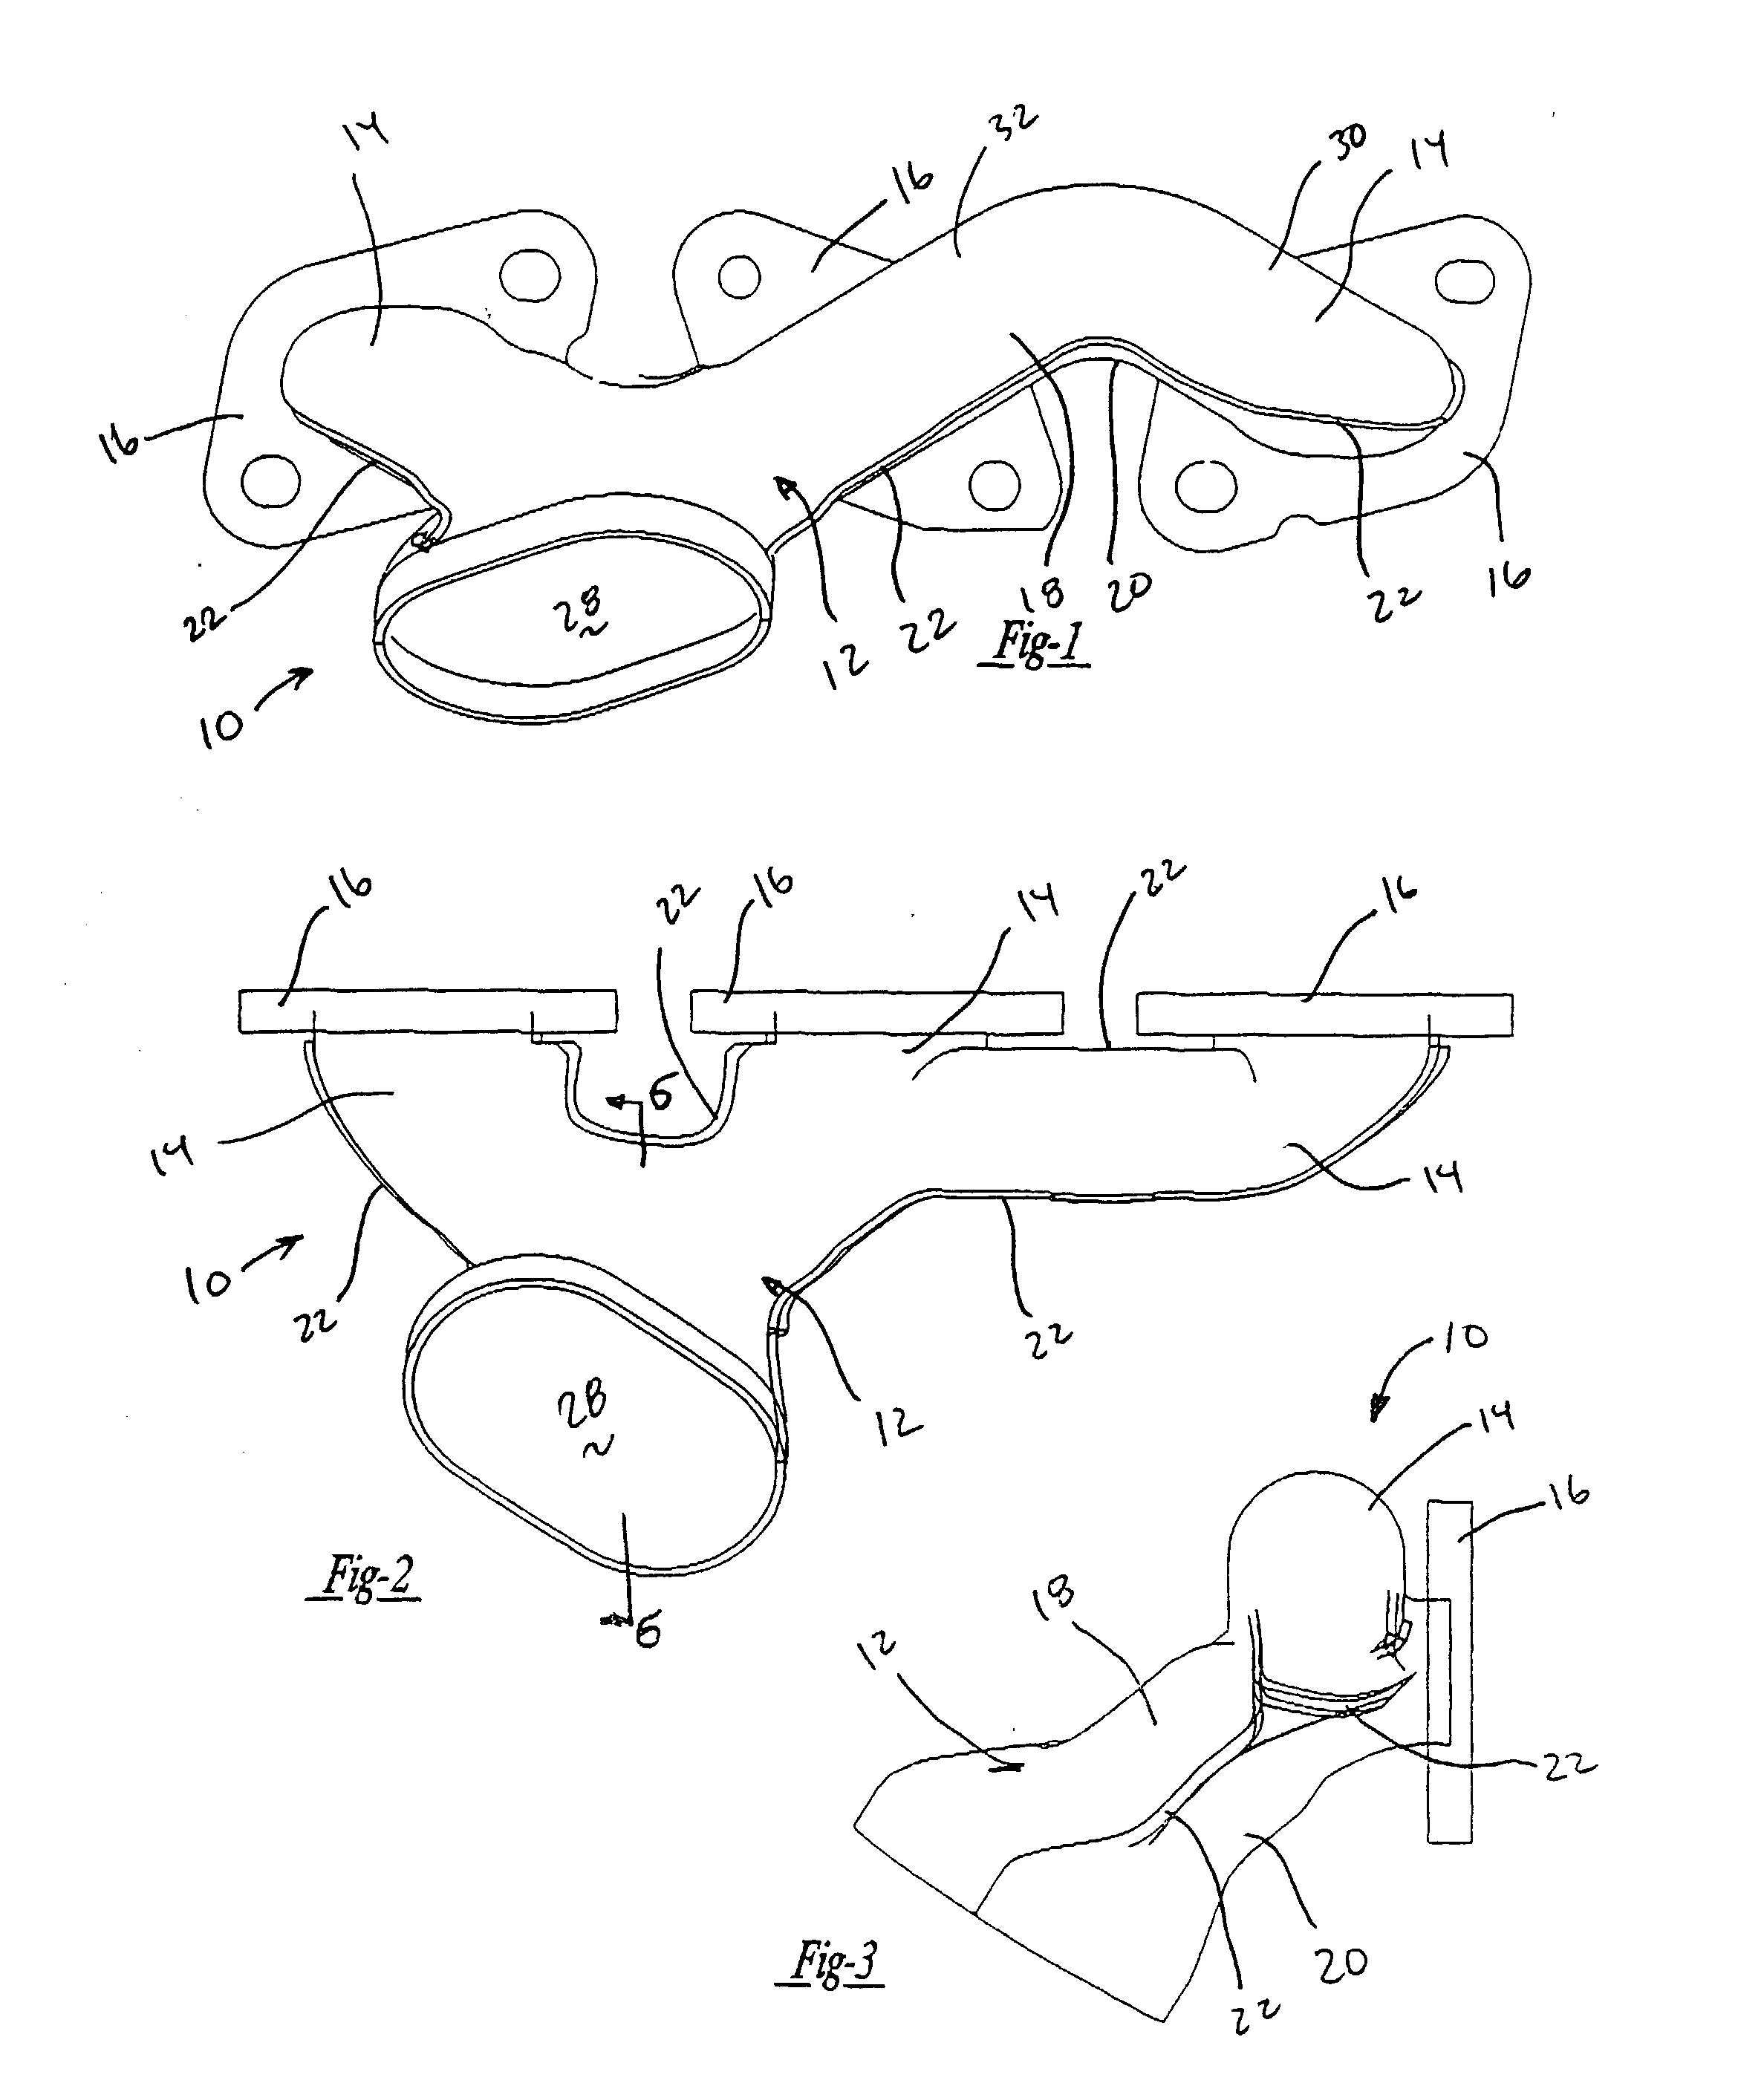 Stamped exhausts manifold for vehicle engines